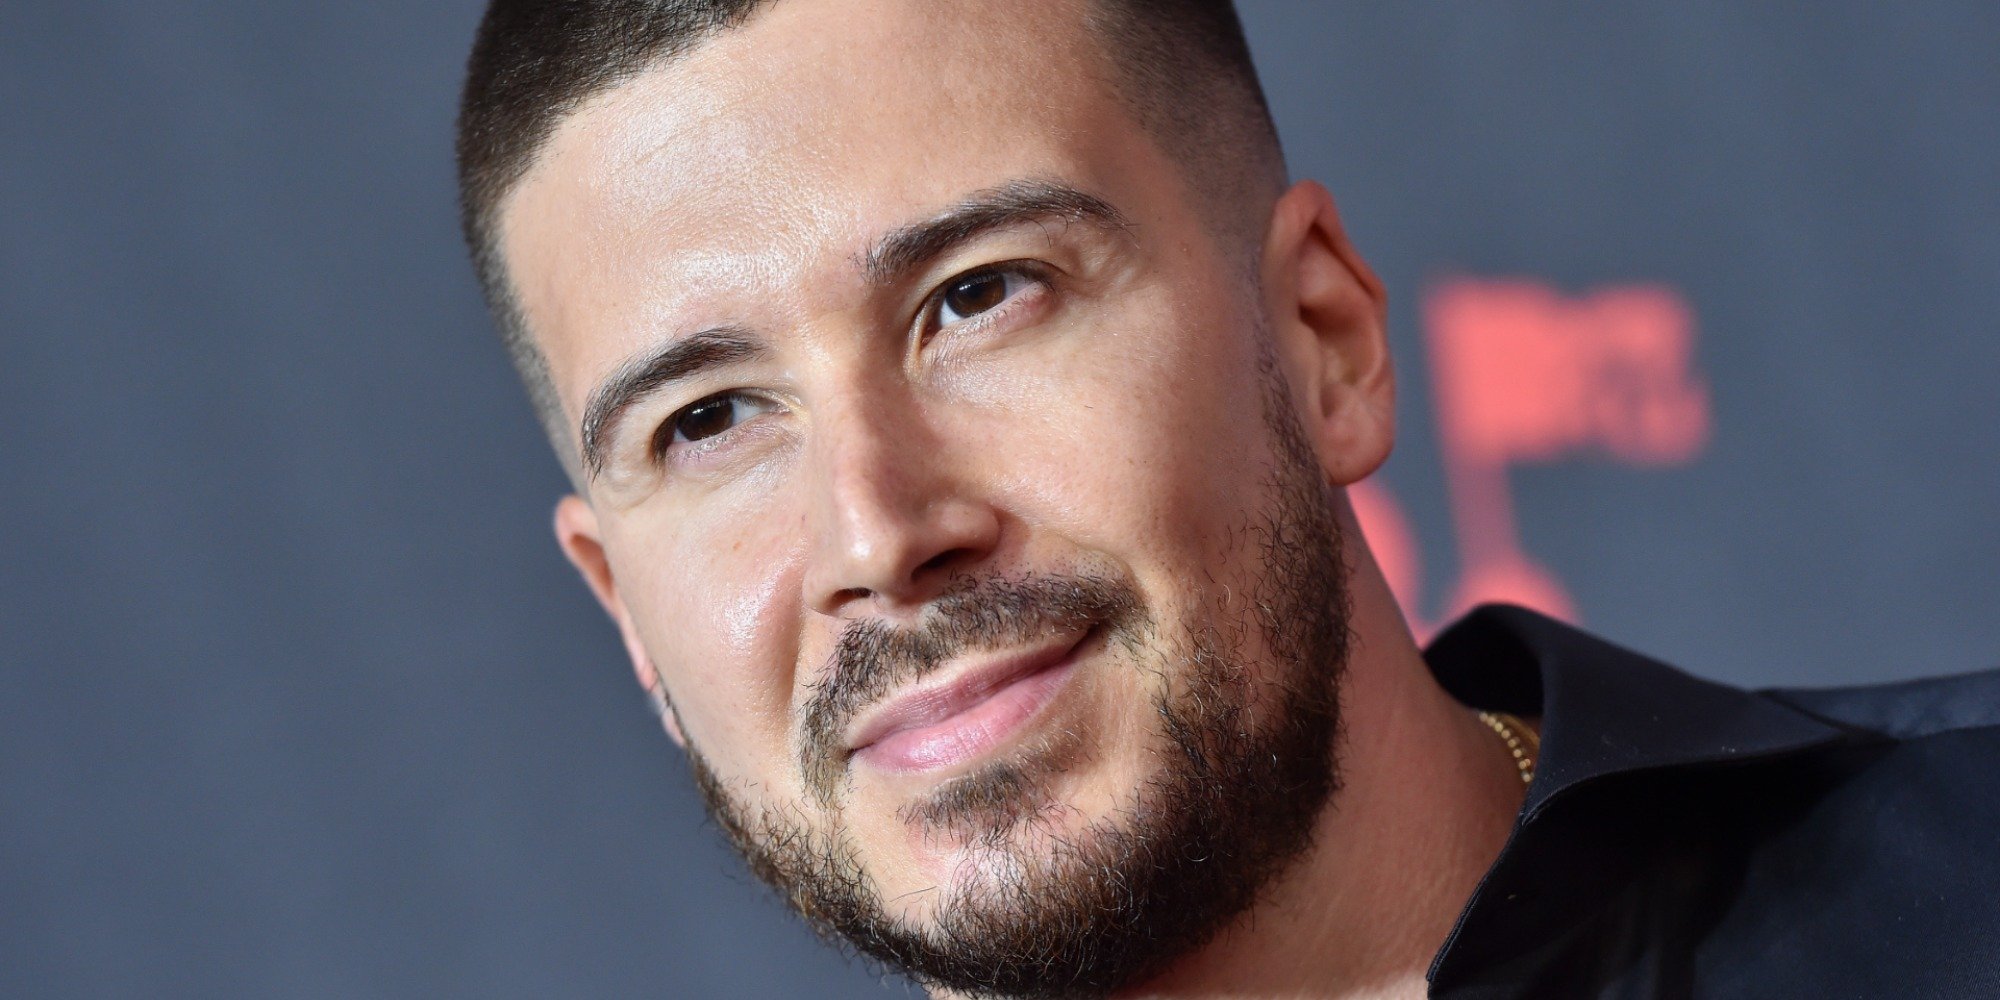 Vinny Guadagnino poses at a red carpet event.